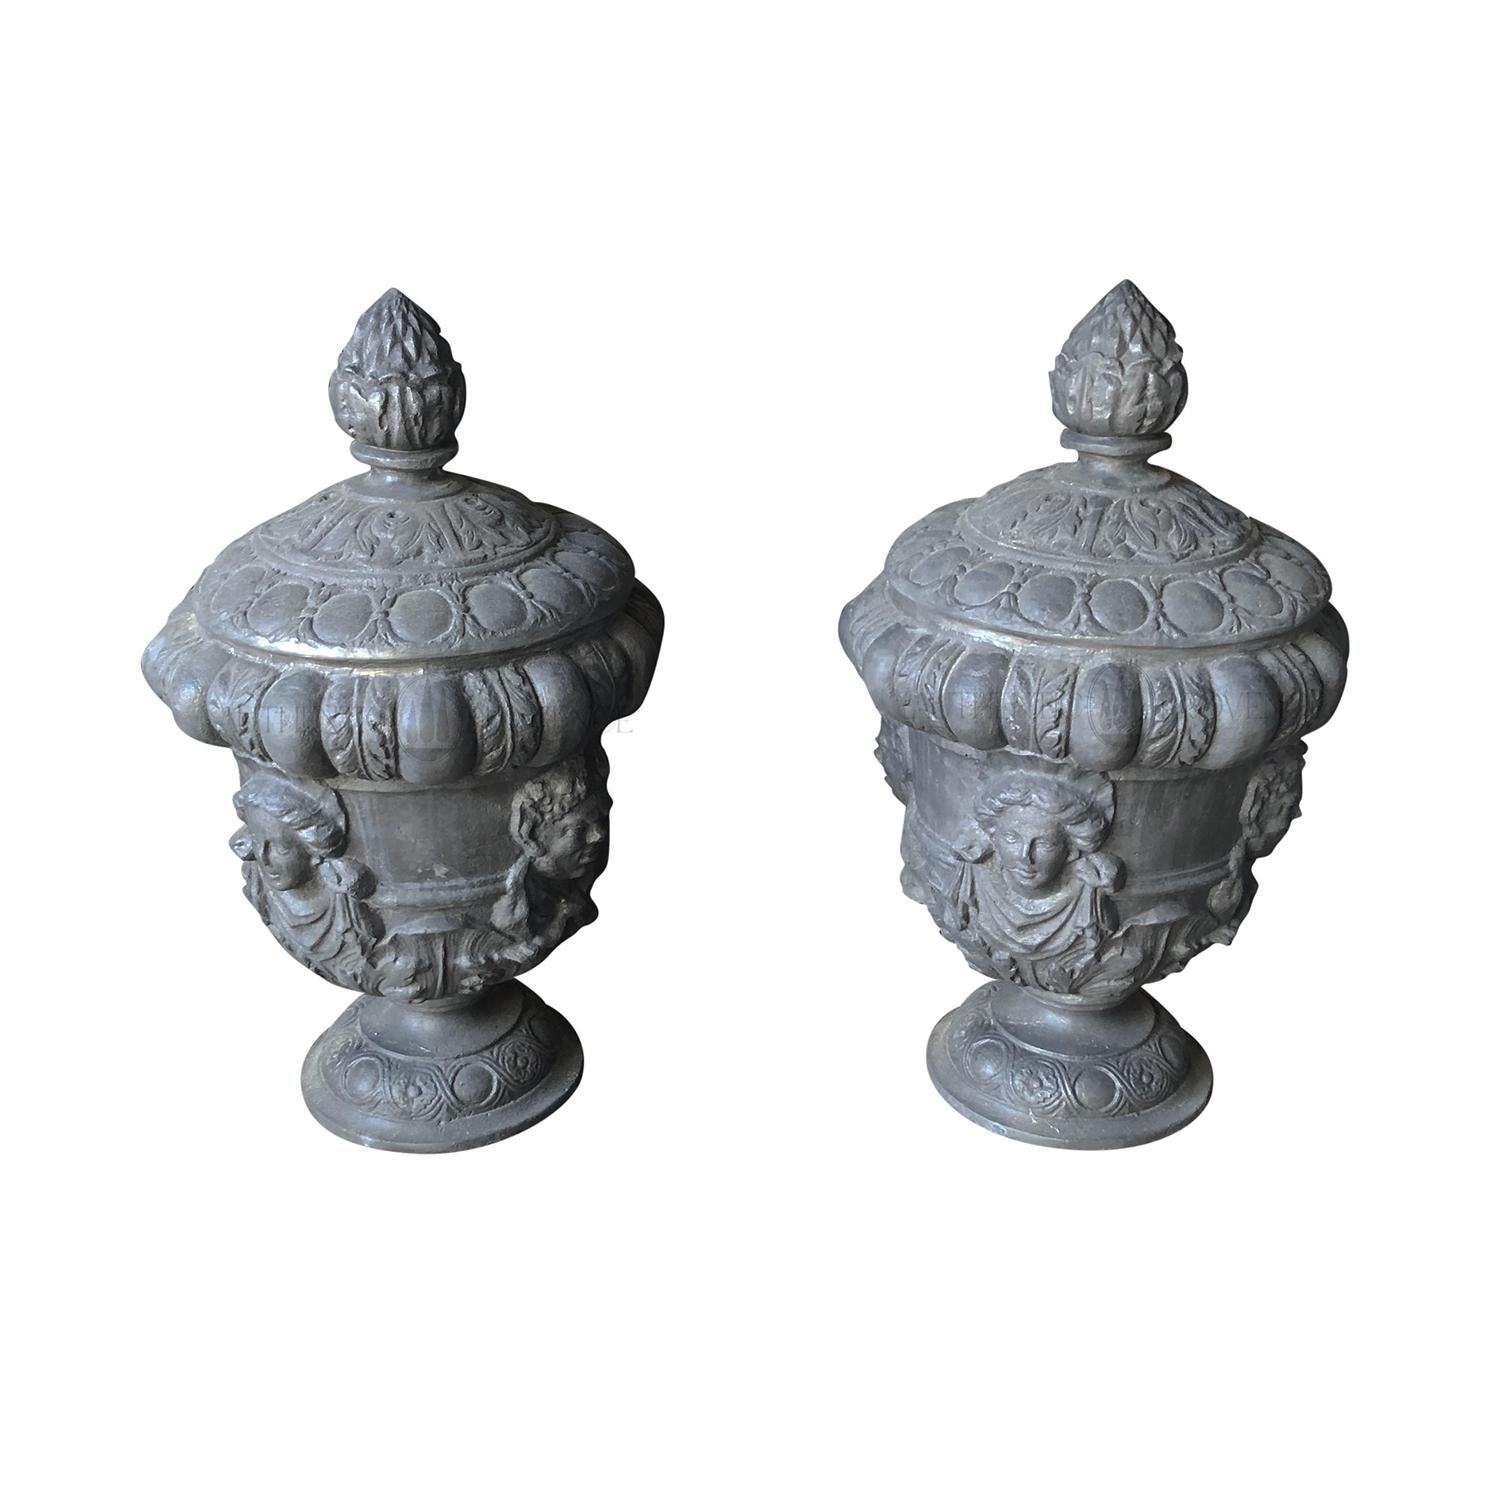 A finely worked pair of 20th Century Queen Anne Finials or garden urns in lead on circular socles, in good condition. From an early 18th Century lead casting, similar can be seen at Hyde Park Corner. During the late 17th and 18th Century, lead urns